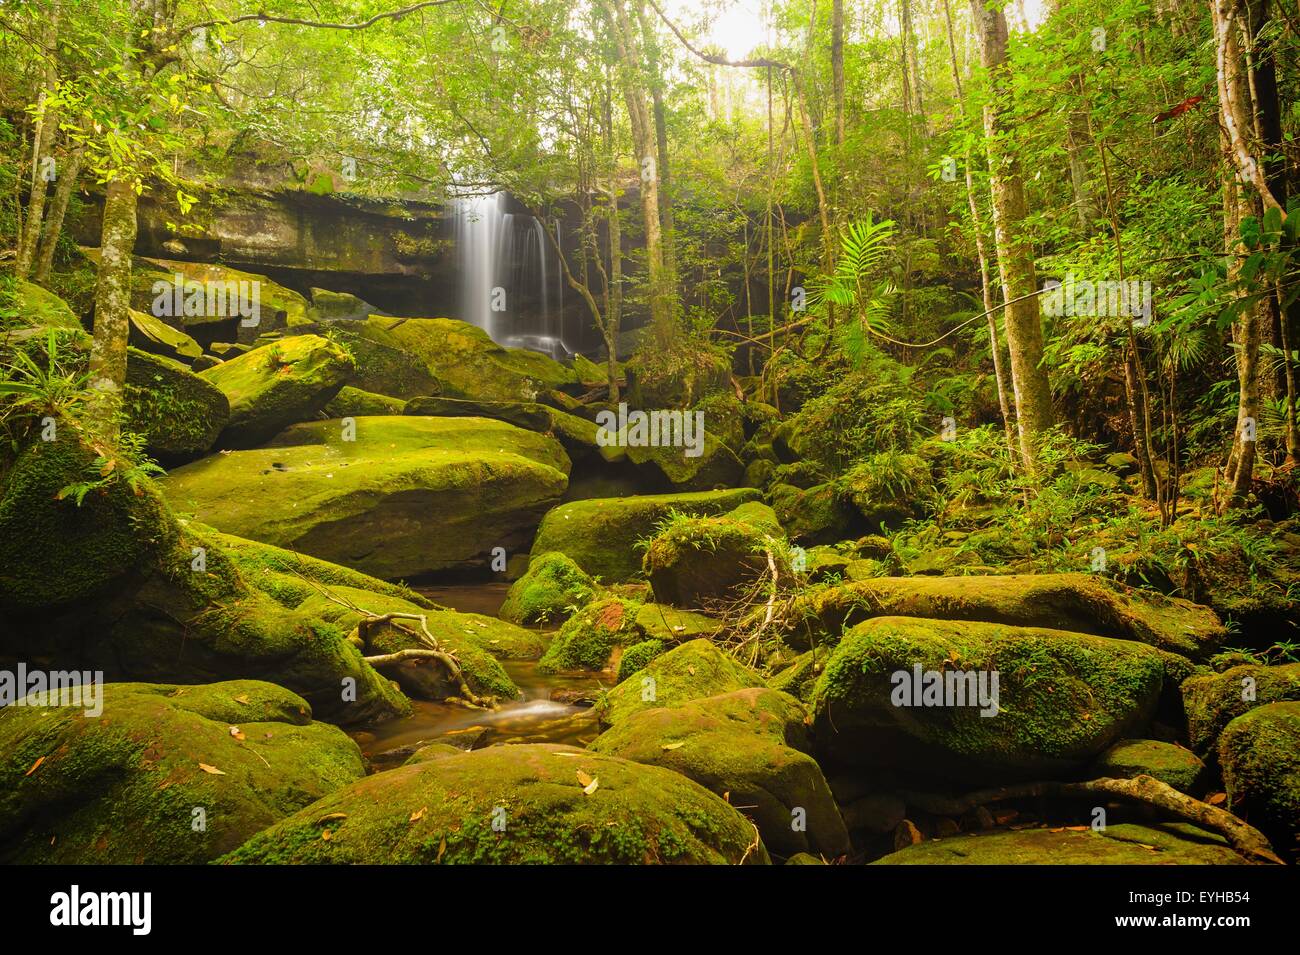 Beautiful cascade falls over mossy rocks in tropical forest, Thailand. Stock Photo